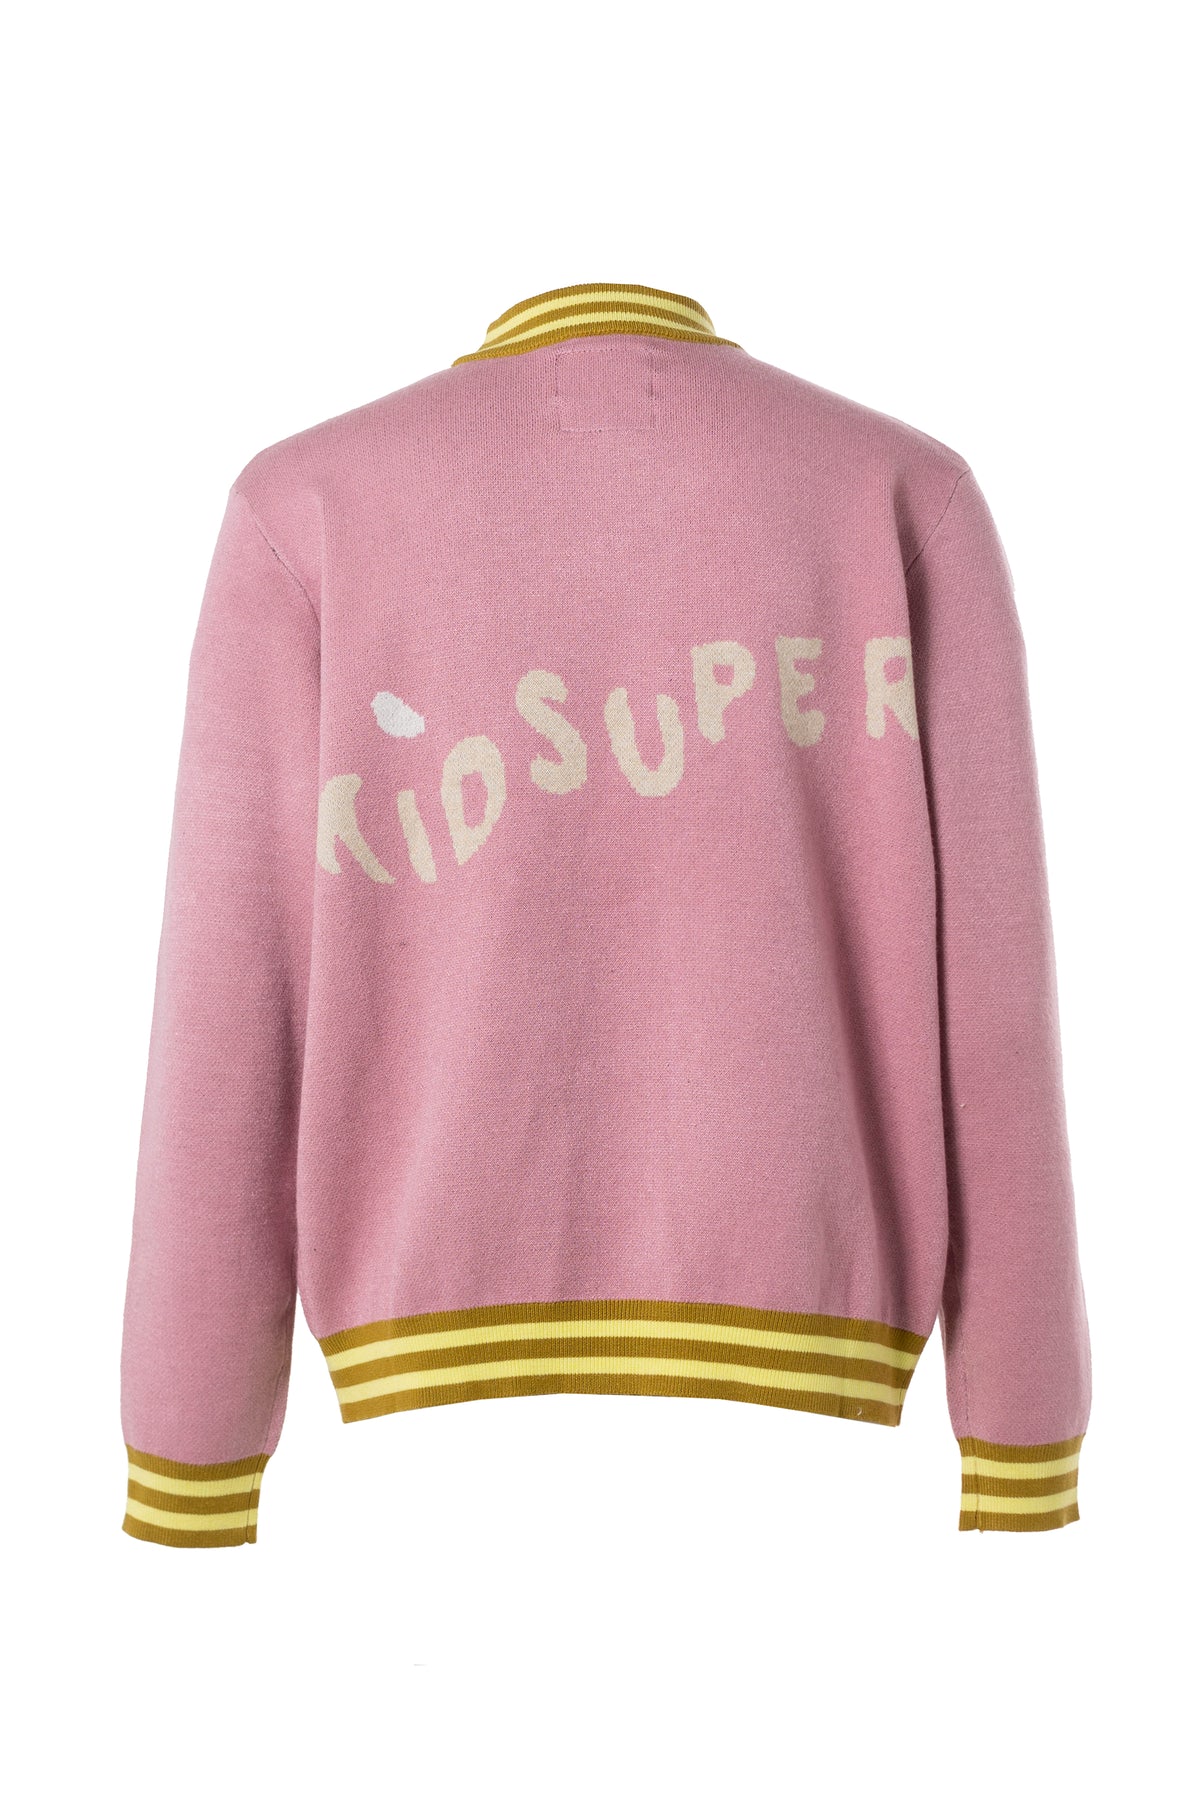 THE CON ARTIST SWEATER / PINK